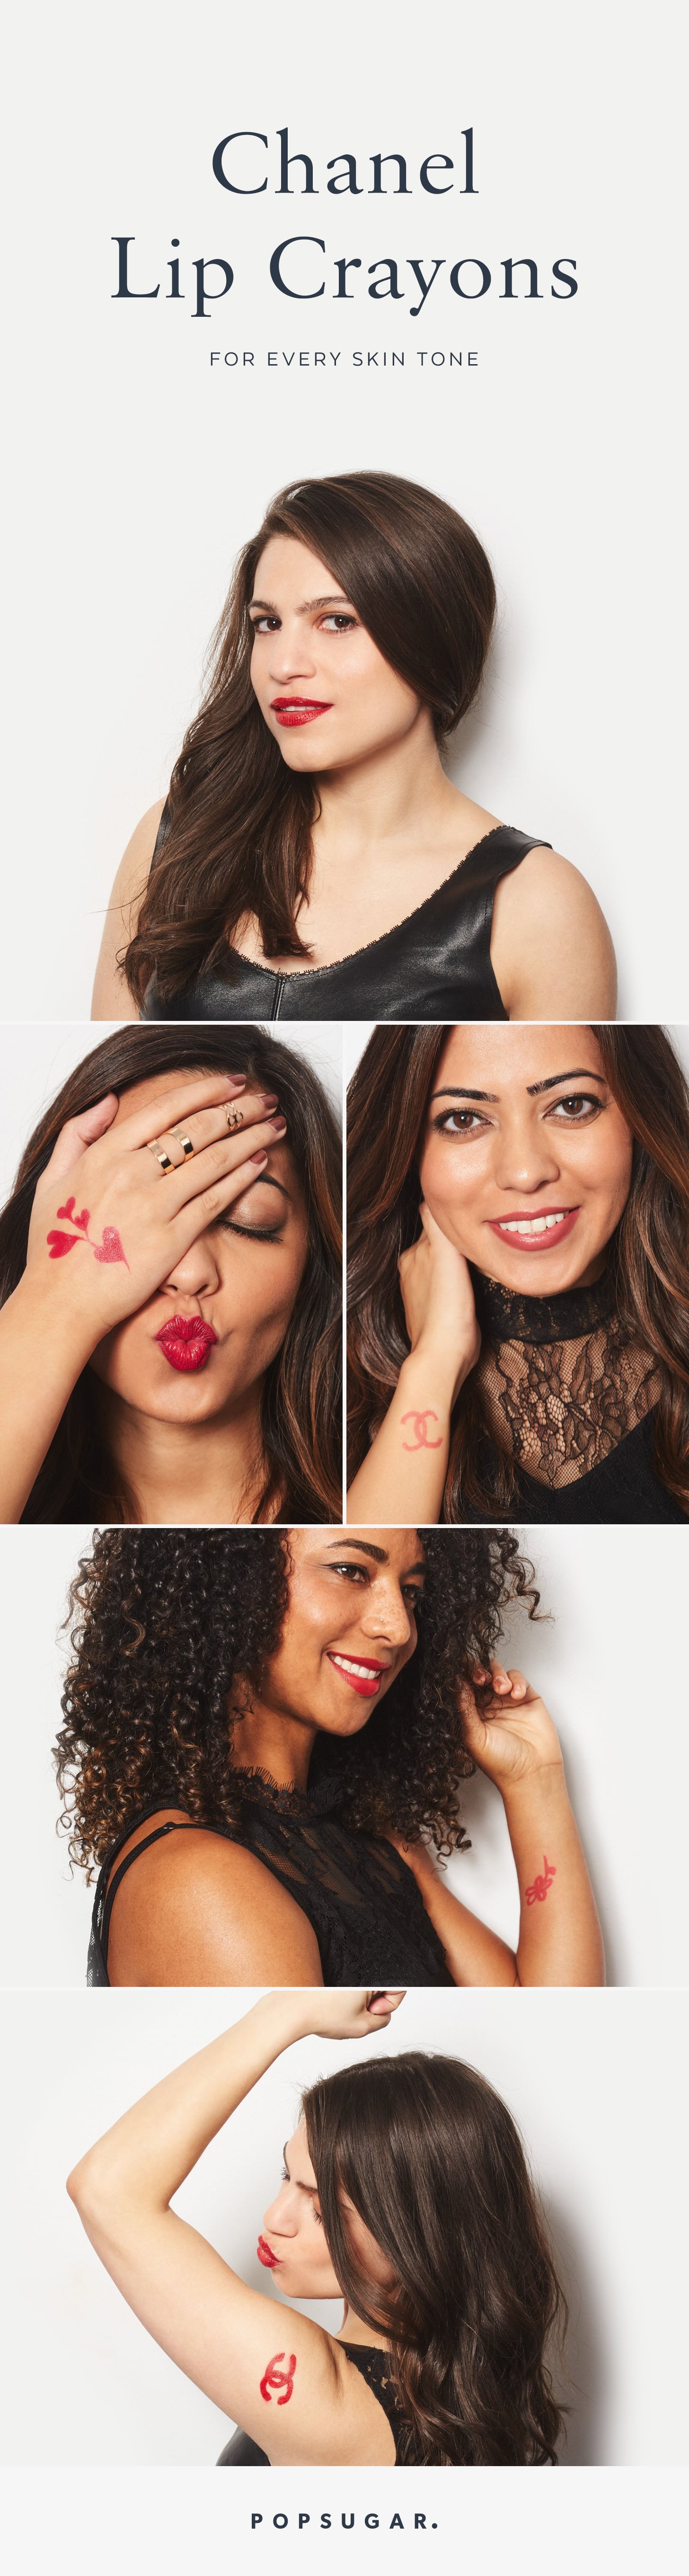 How to Wear Chanel Lip Crayons